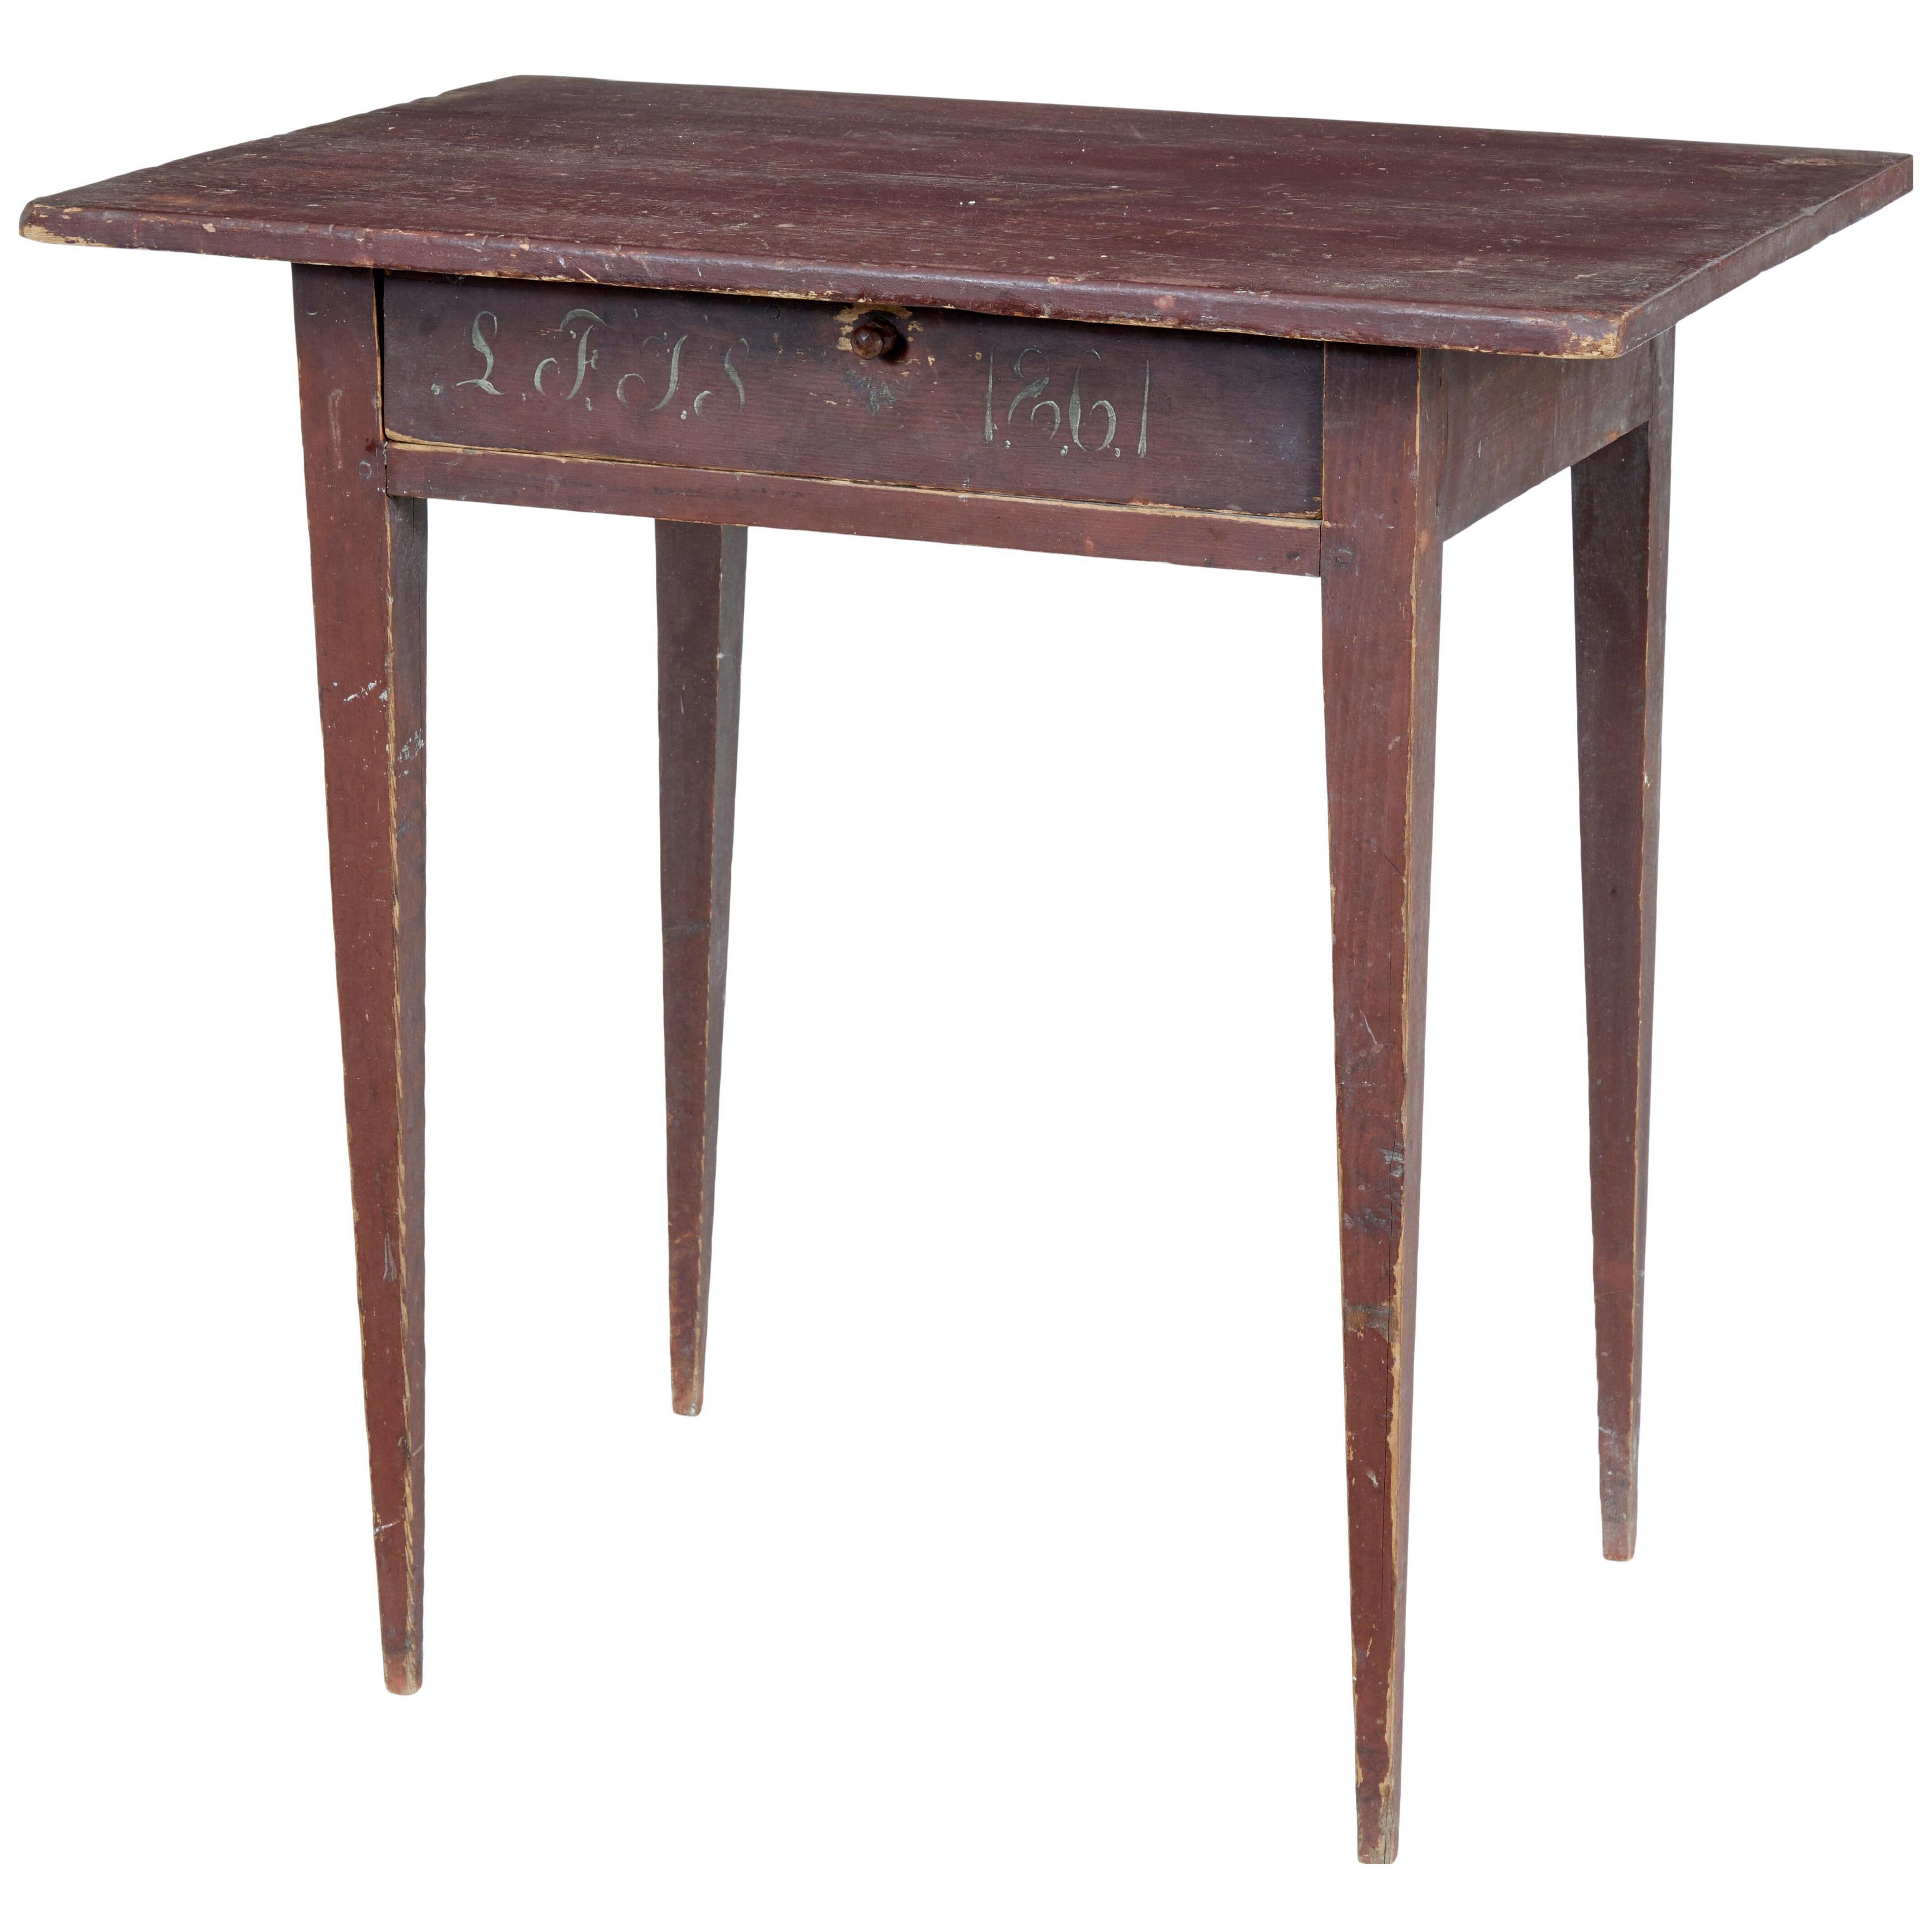 SWEDISH MID 19TH CENTURY RUSTIC PAINTED PINE SIDE TABLE